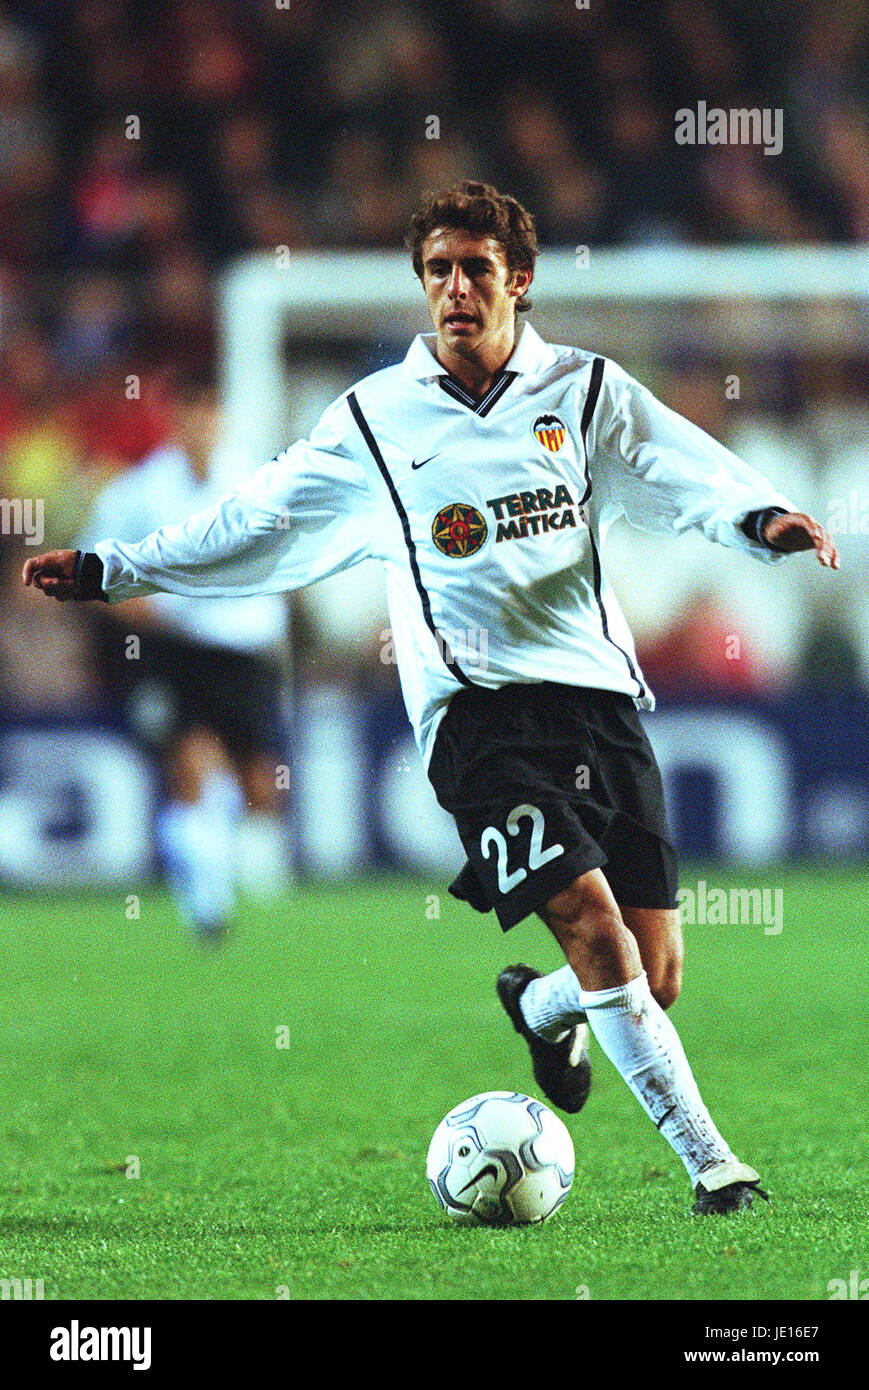 Pablo cesar aimar hi-res stock photography and images - Alamy